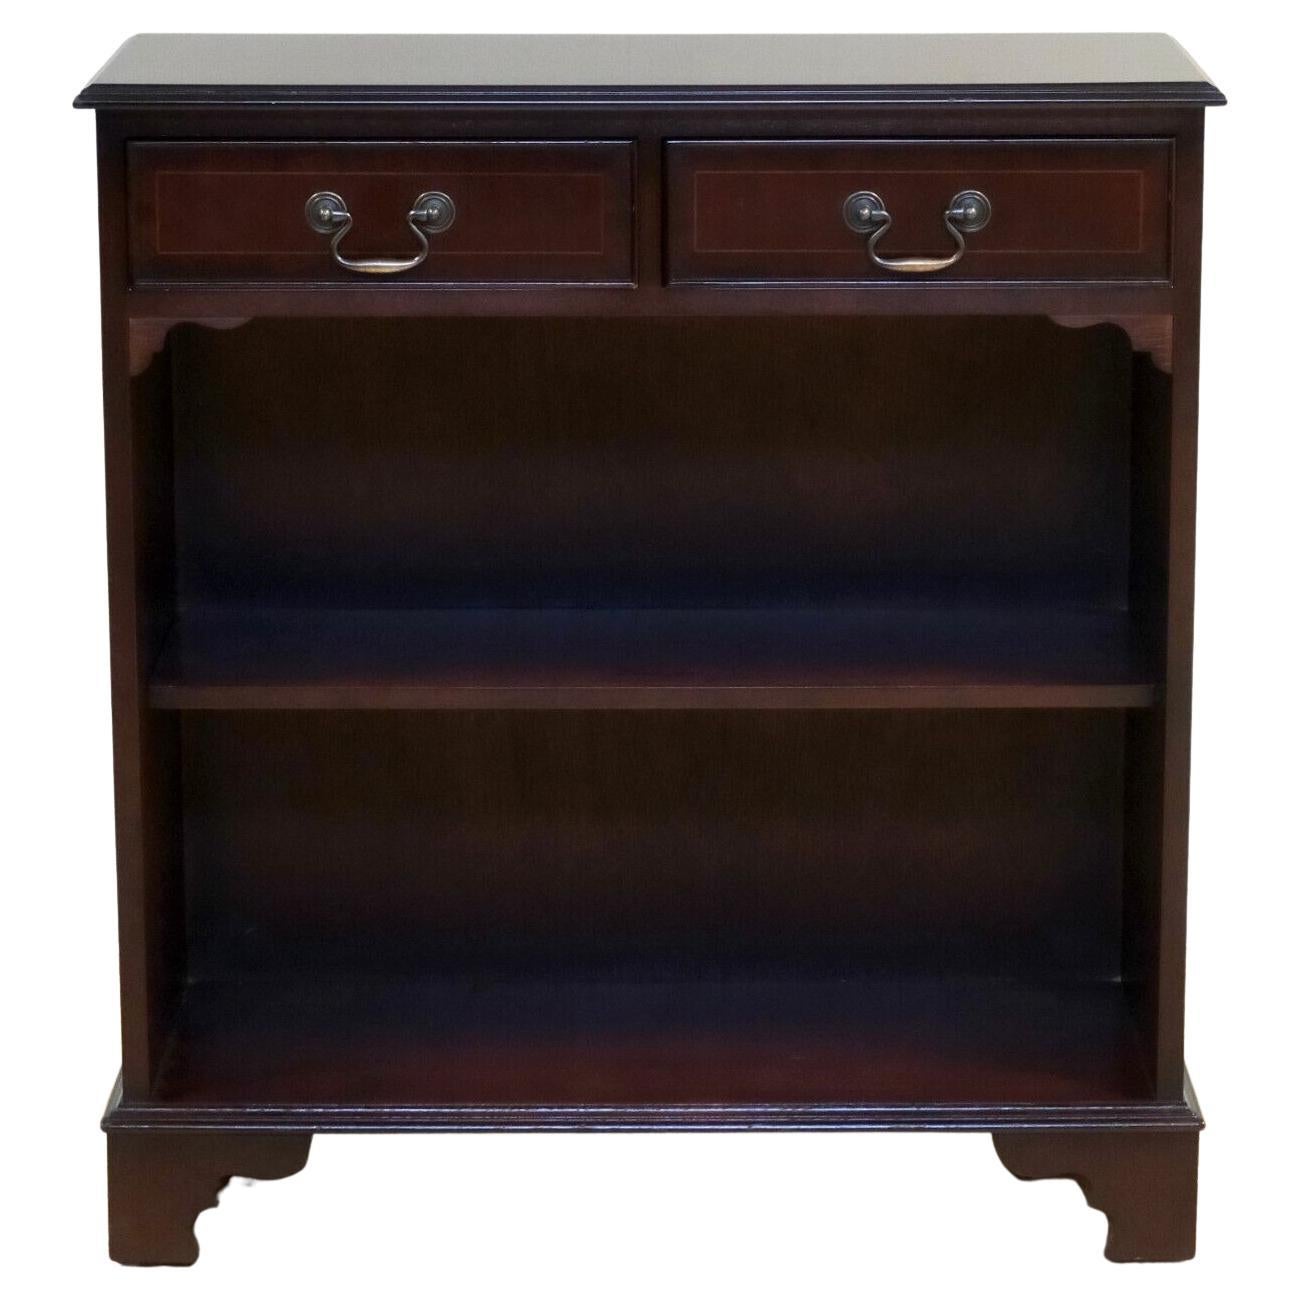 We are delighted to offer for sale this elegant vintage Mahogany dwarf open bookcase with pair of drawers.

This classic, well made piece is presented with a pair of drawers and single shelf, giving you plenty of storage. Due to its size, this ideal